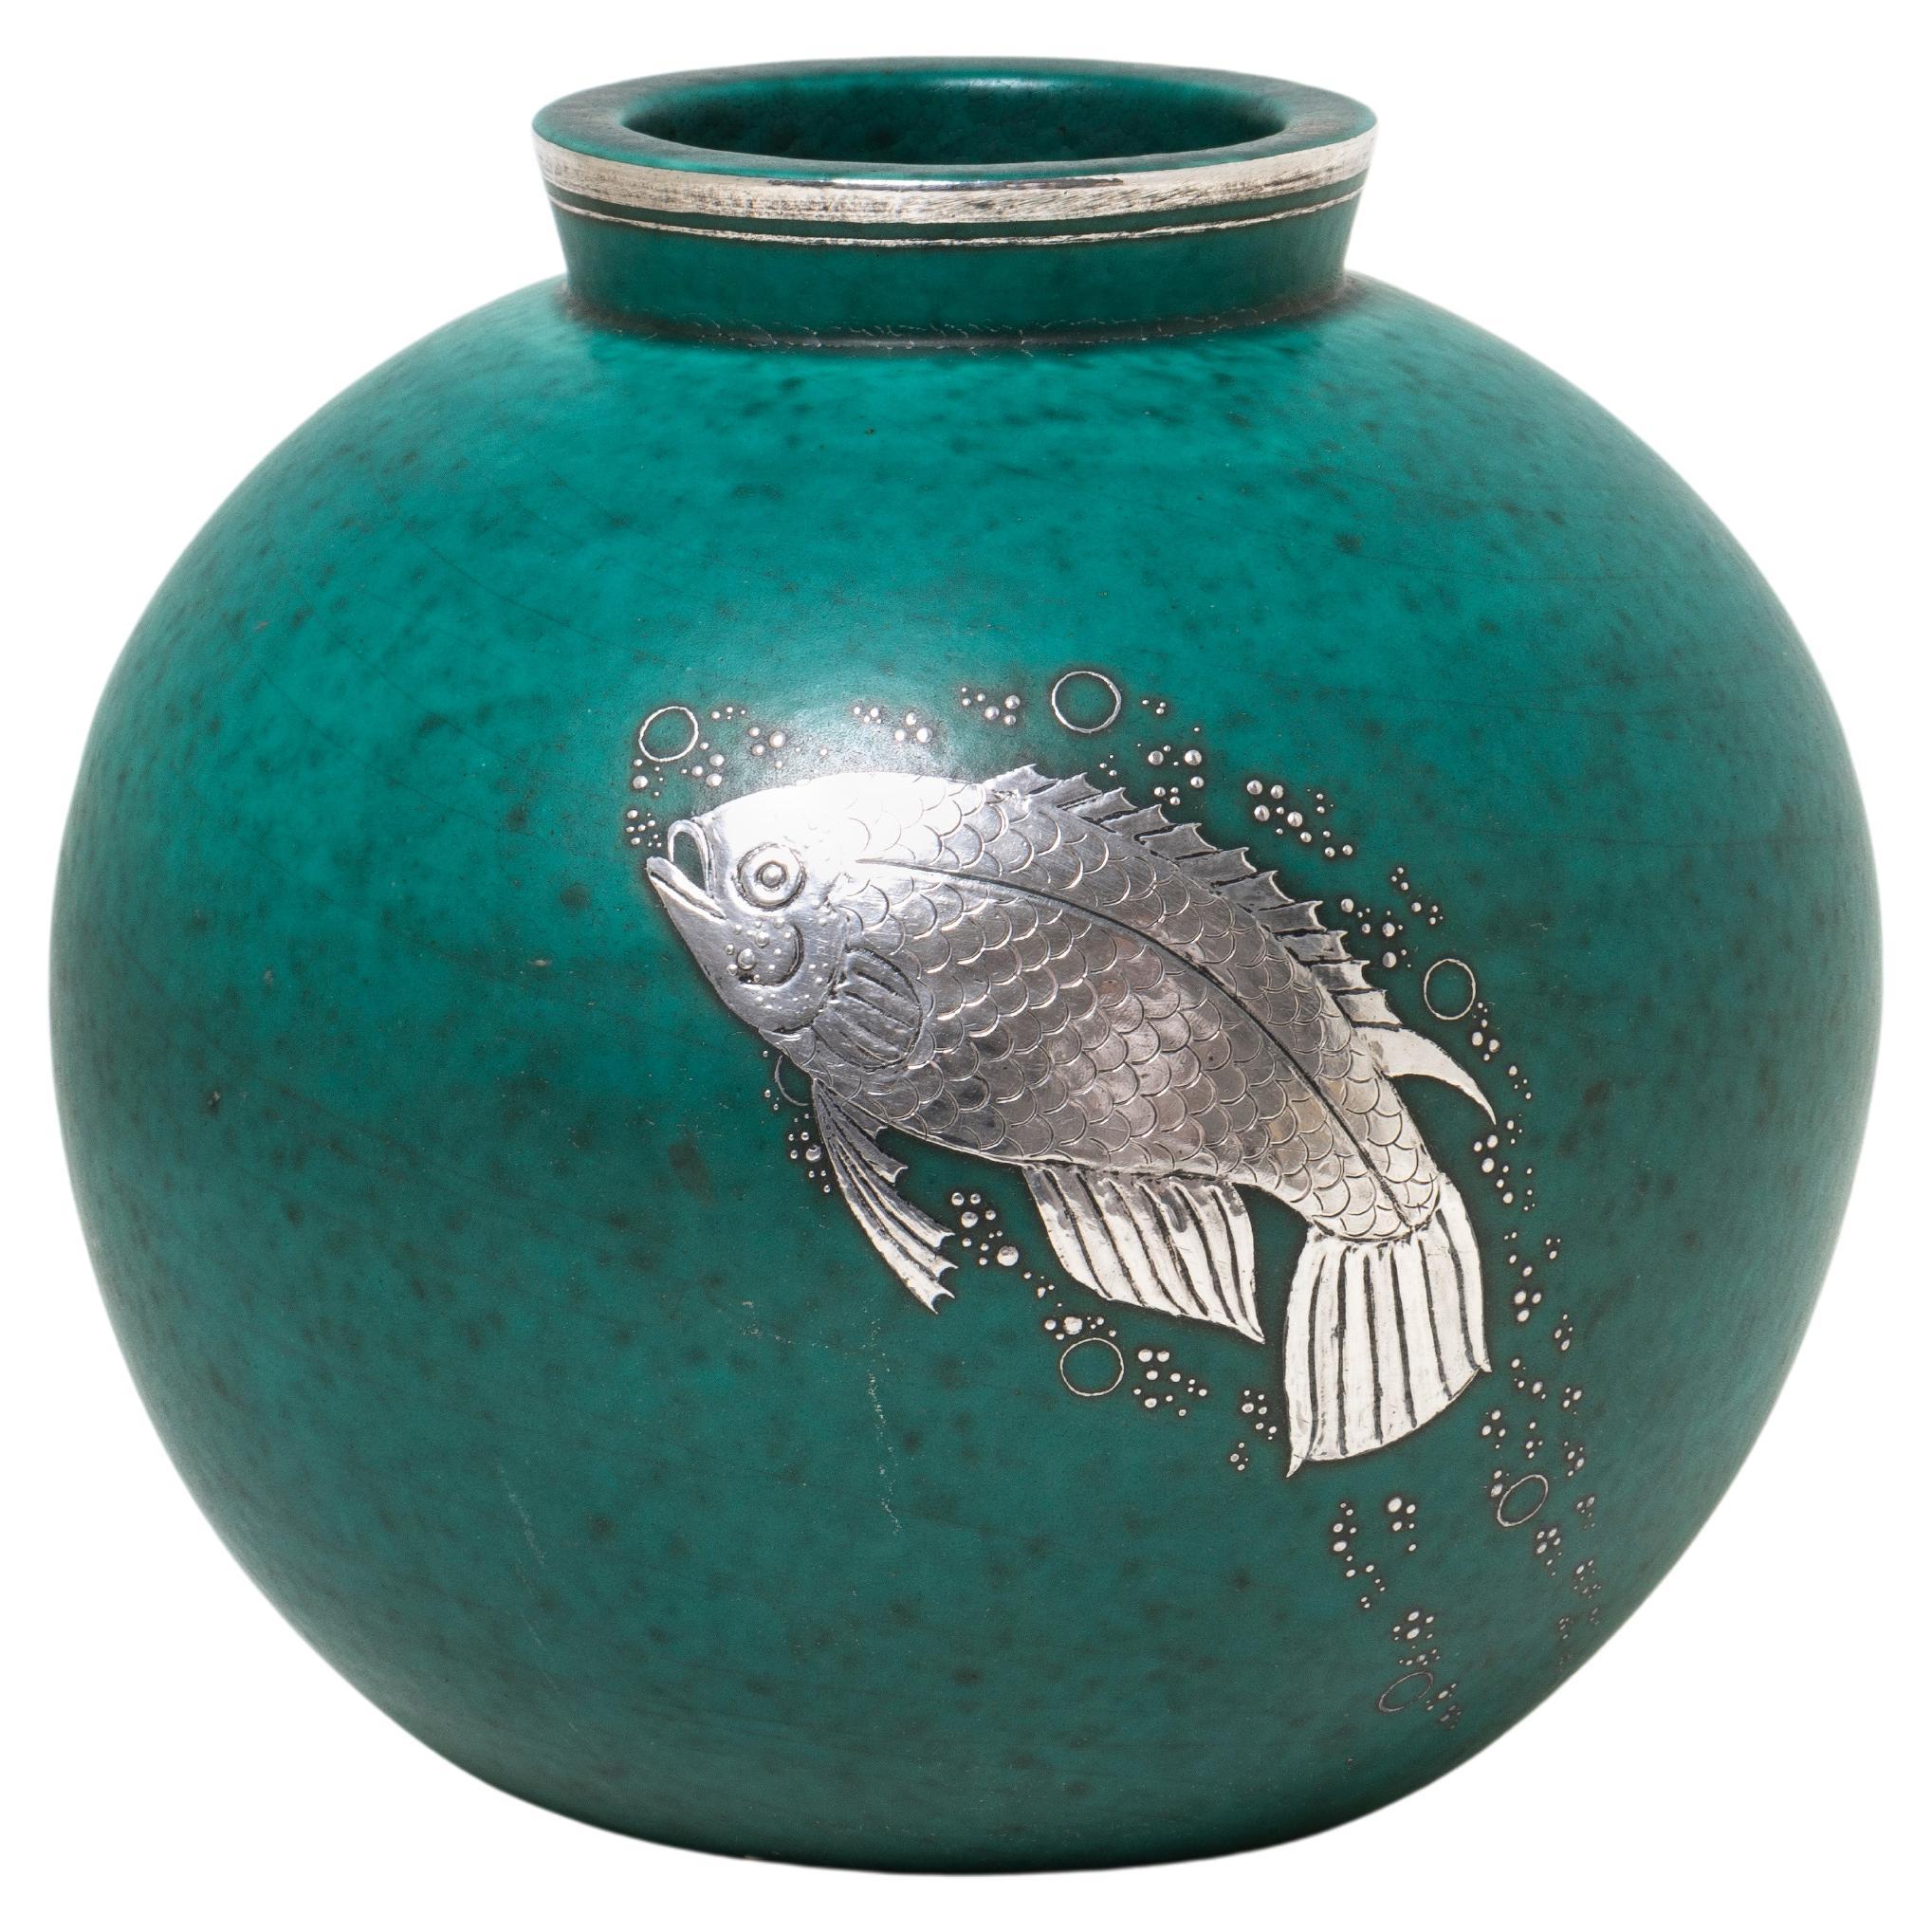 Wilhelm Kåge (1889-1960) is one of the most well-known representatives of the illustrious Swedish ceramic design of the 20th century. This piece is stamped 